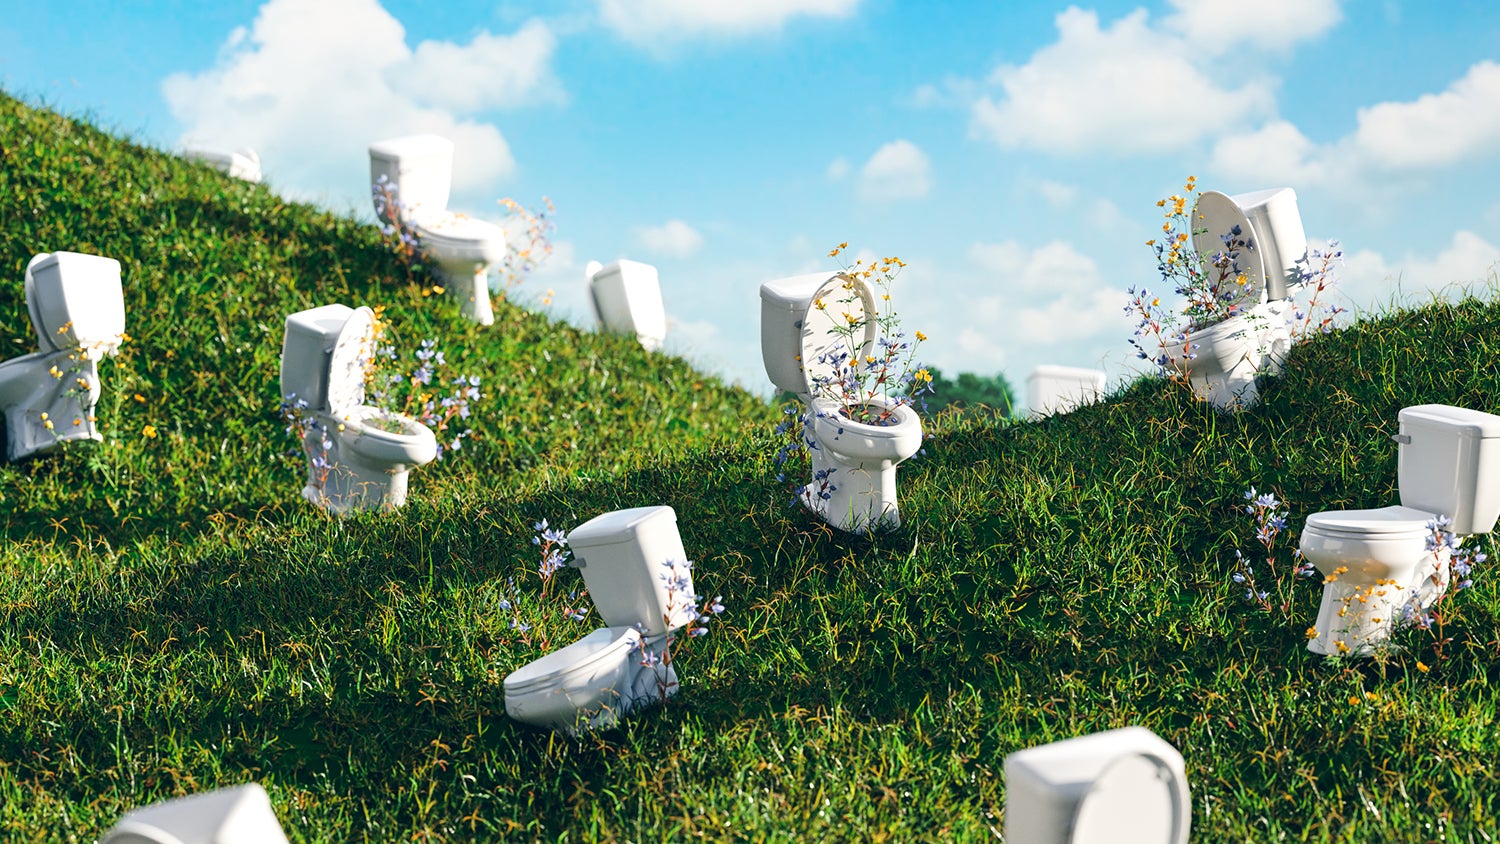 White toilets with flowers growing out of them, set on a grassy hill against a backdrop of fluffy clouds